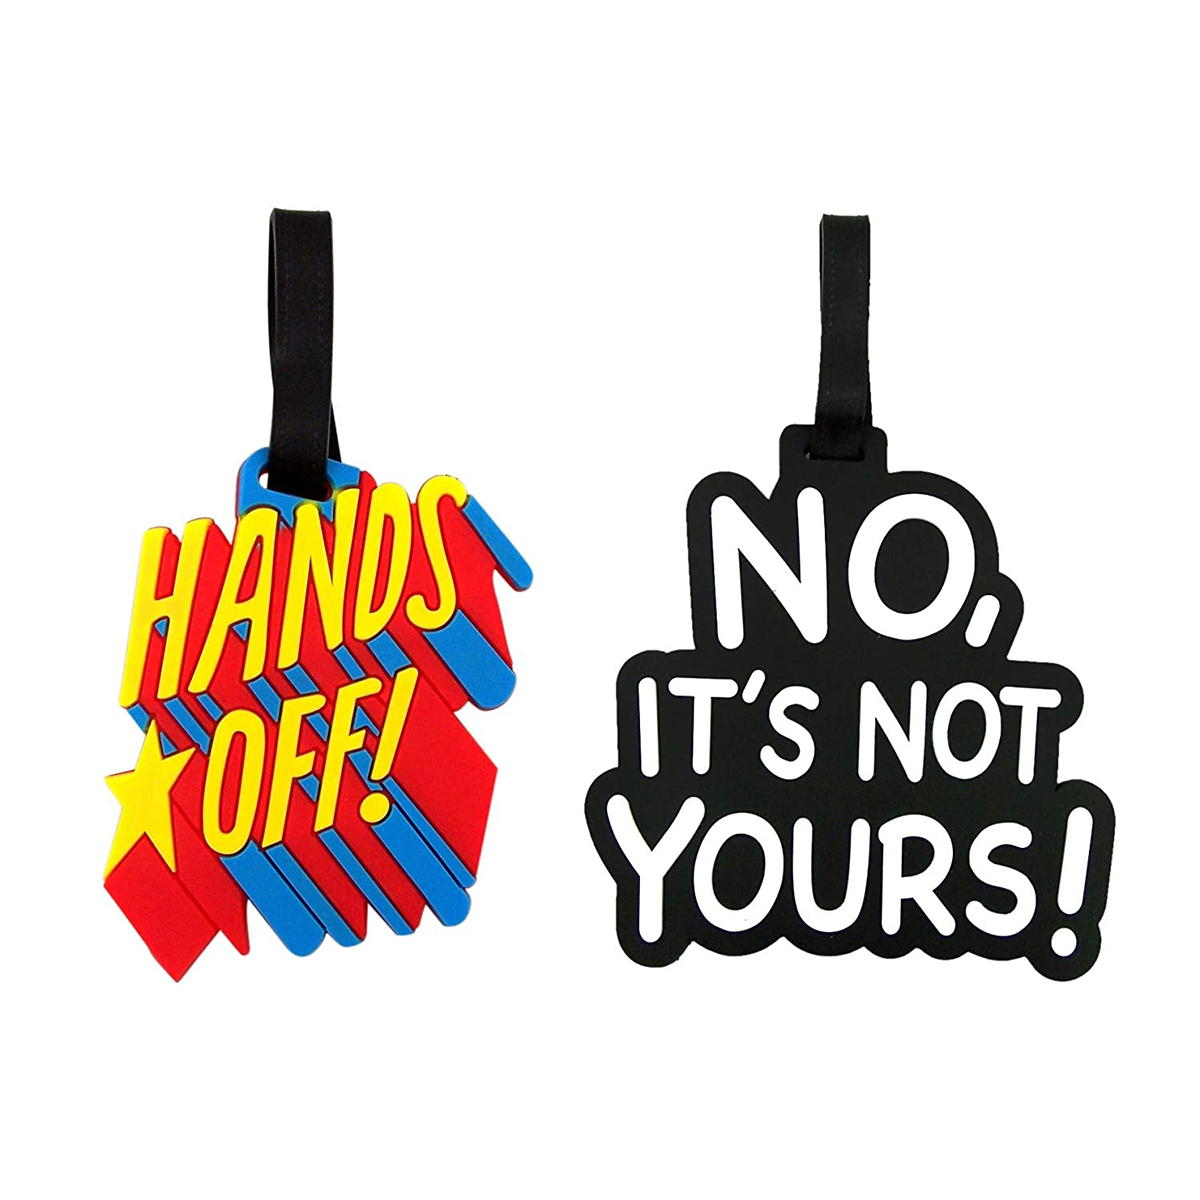 Fashionable No, It's Not Yours! and Hands Off! Funny Luggage Tags, Pack of 2